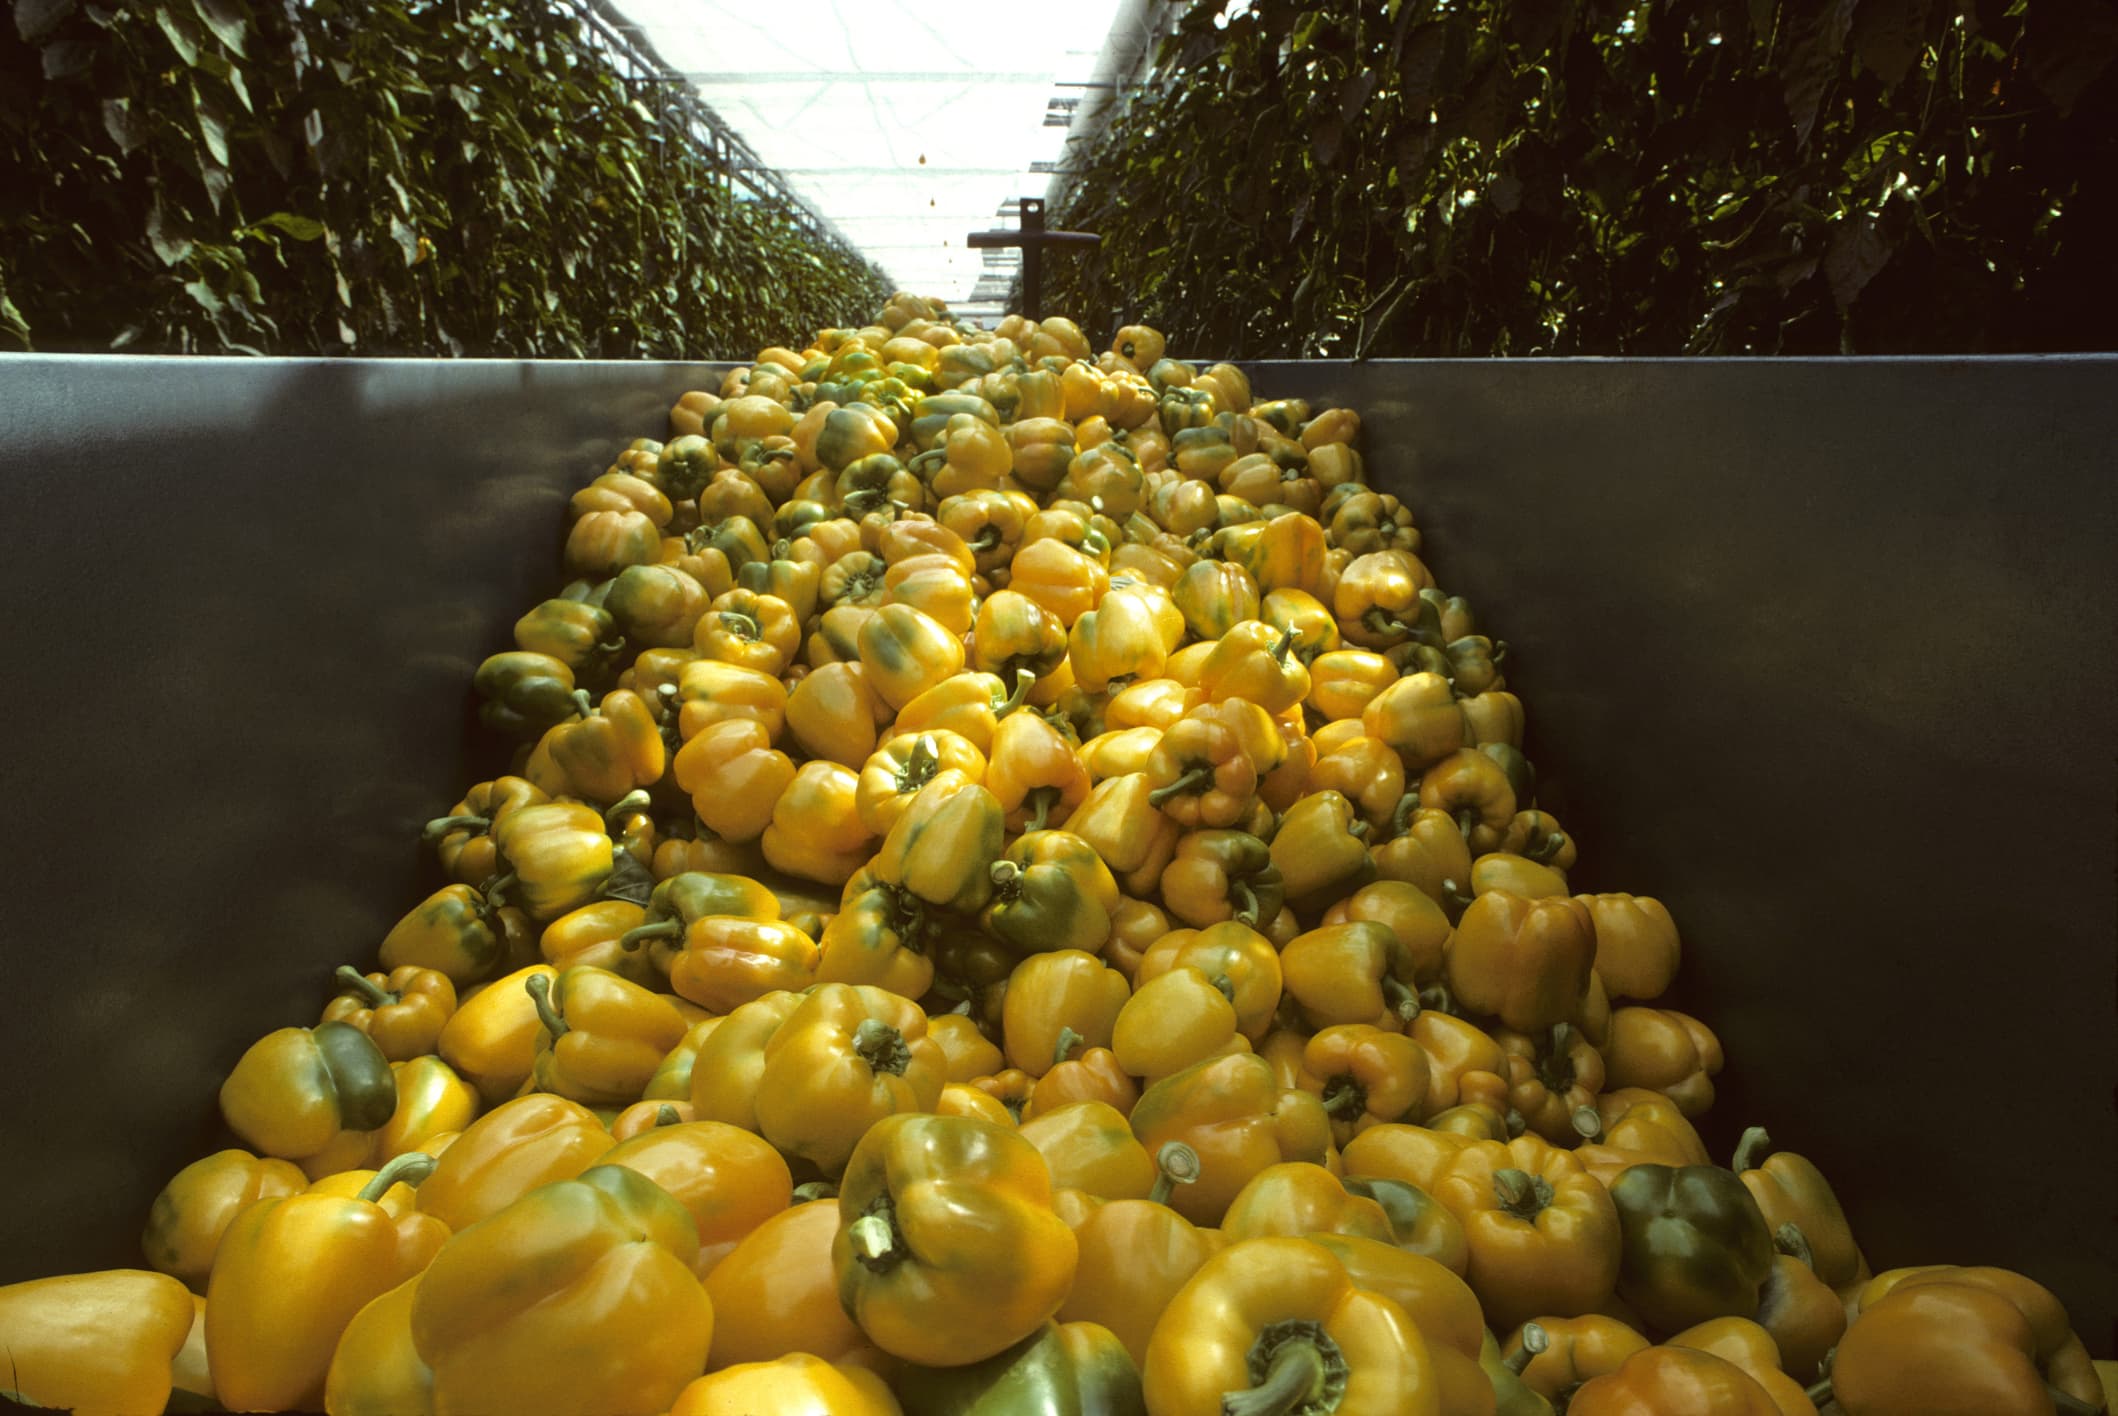 How renewables and greenhouses are teaming up to grow fruits and vegetables